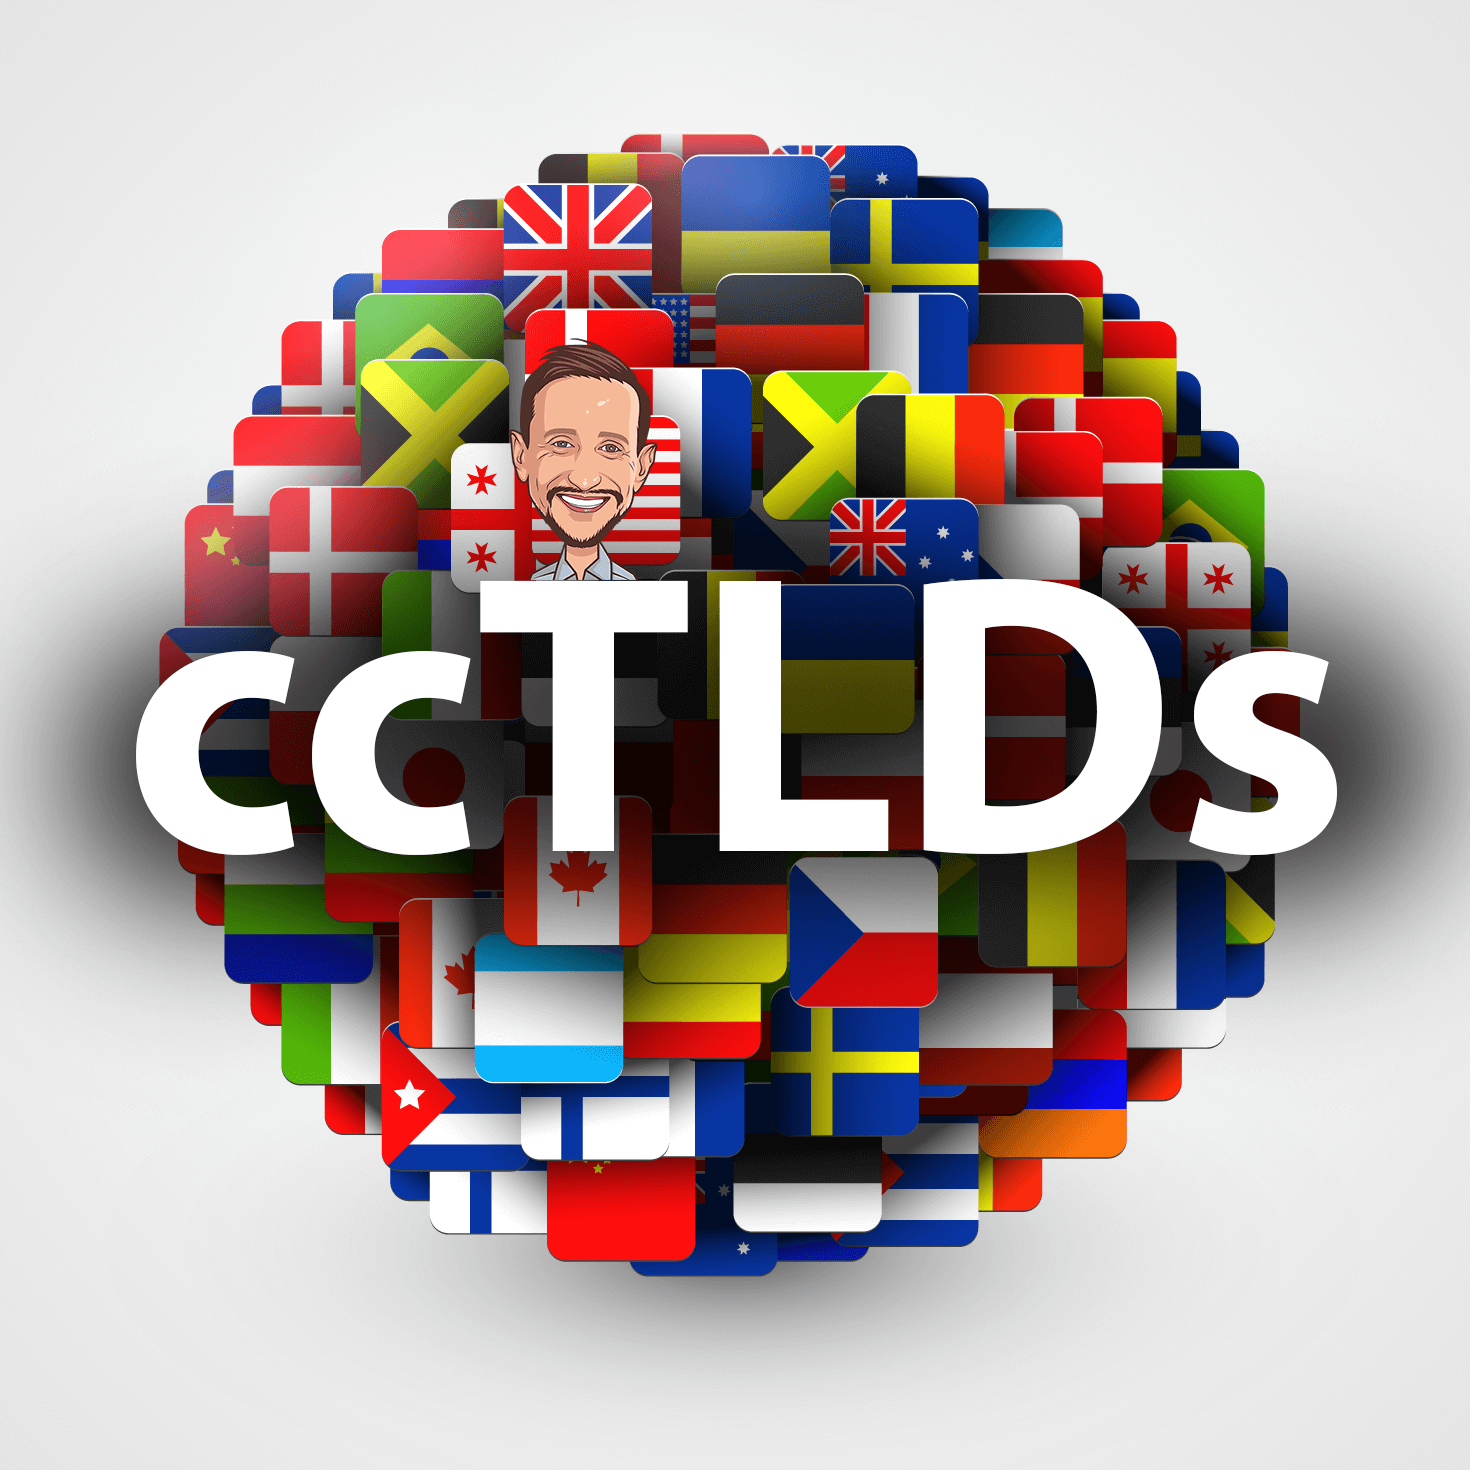 Okay, I’m too excited not to share – I’m doubling down on ccTLDs this year